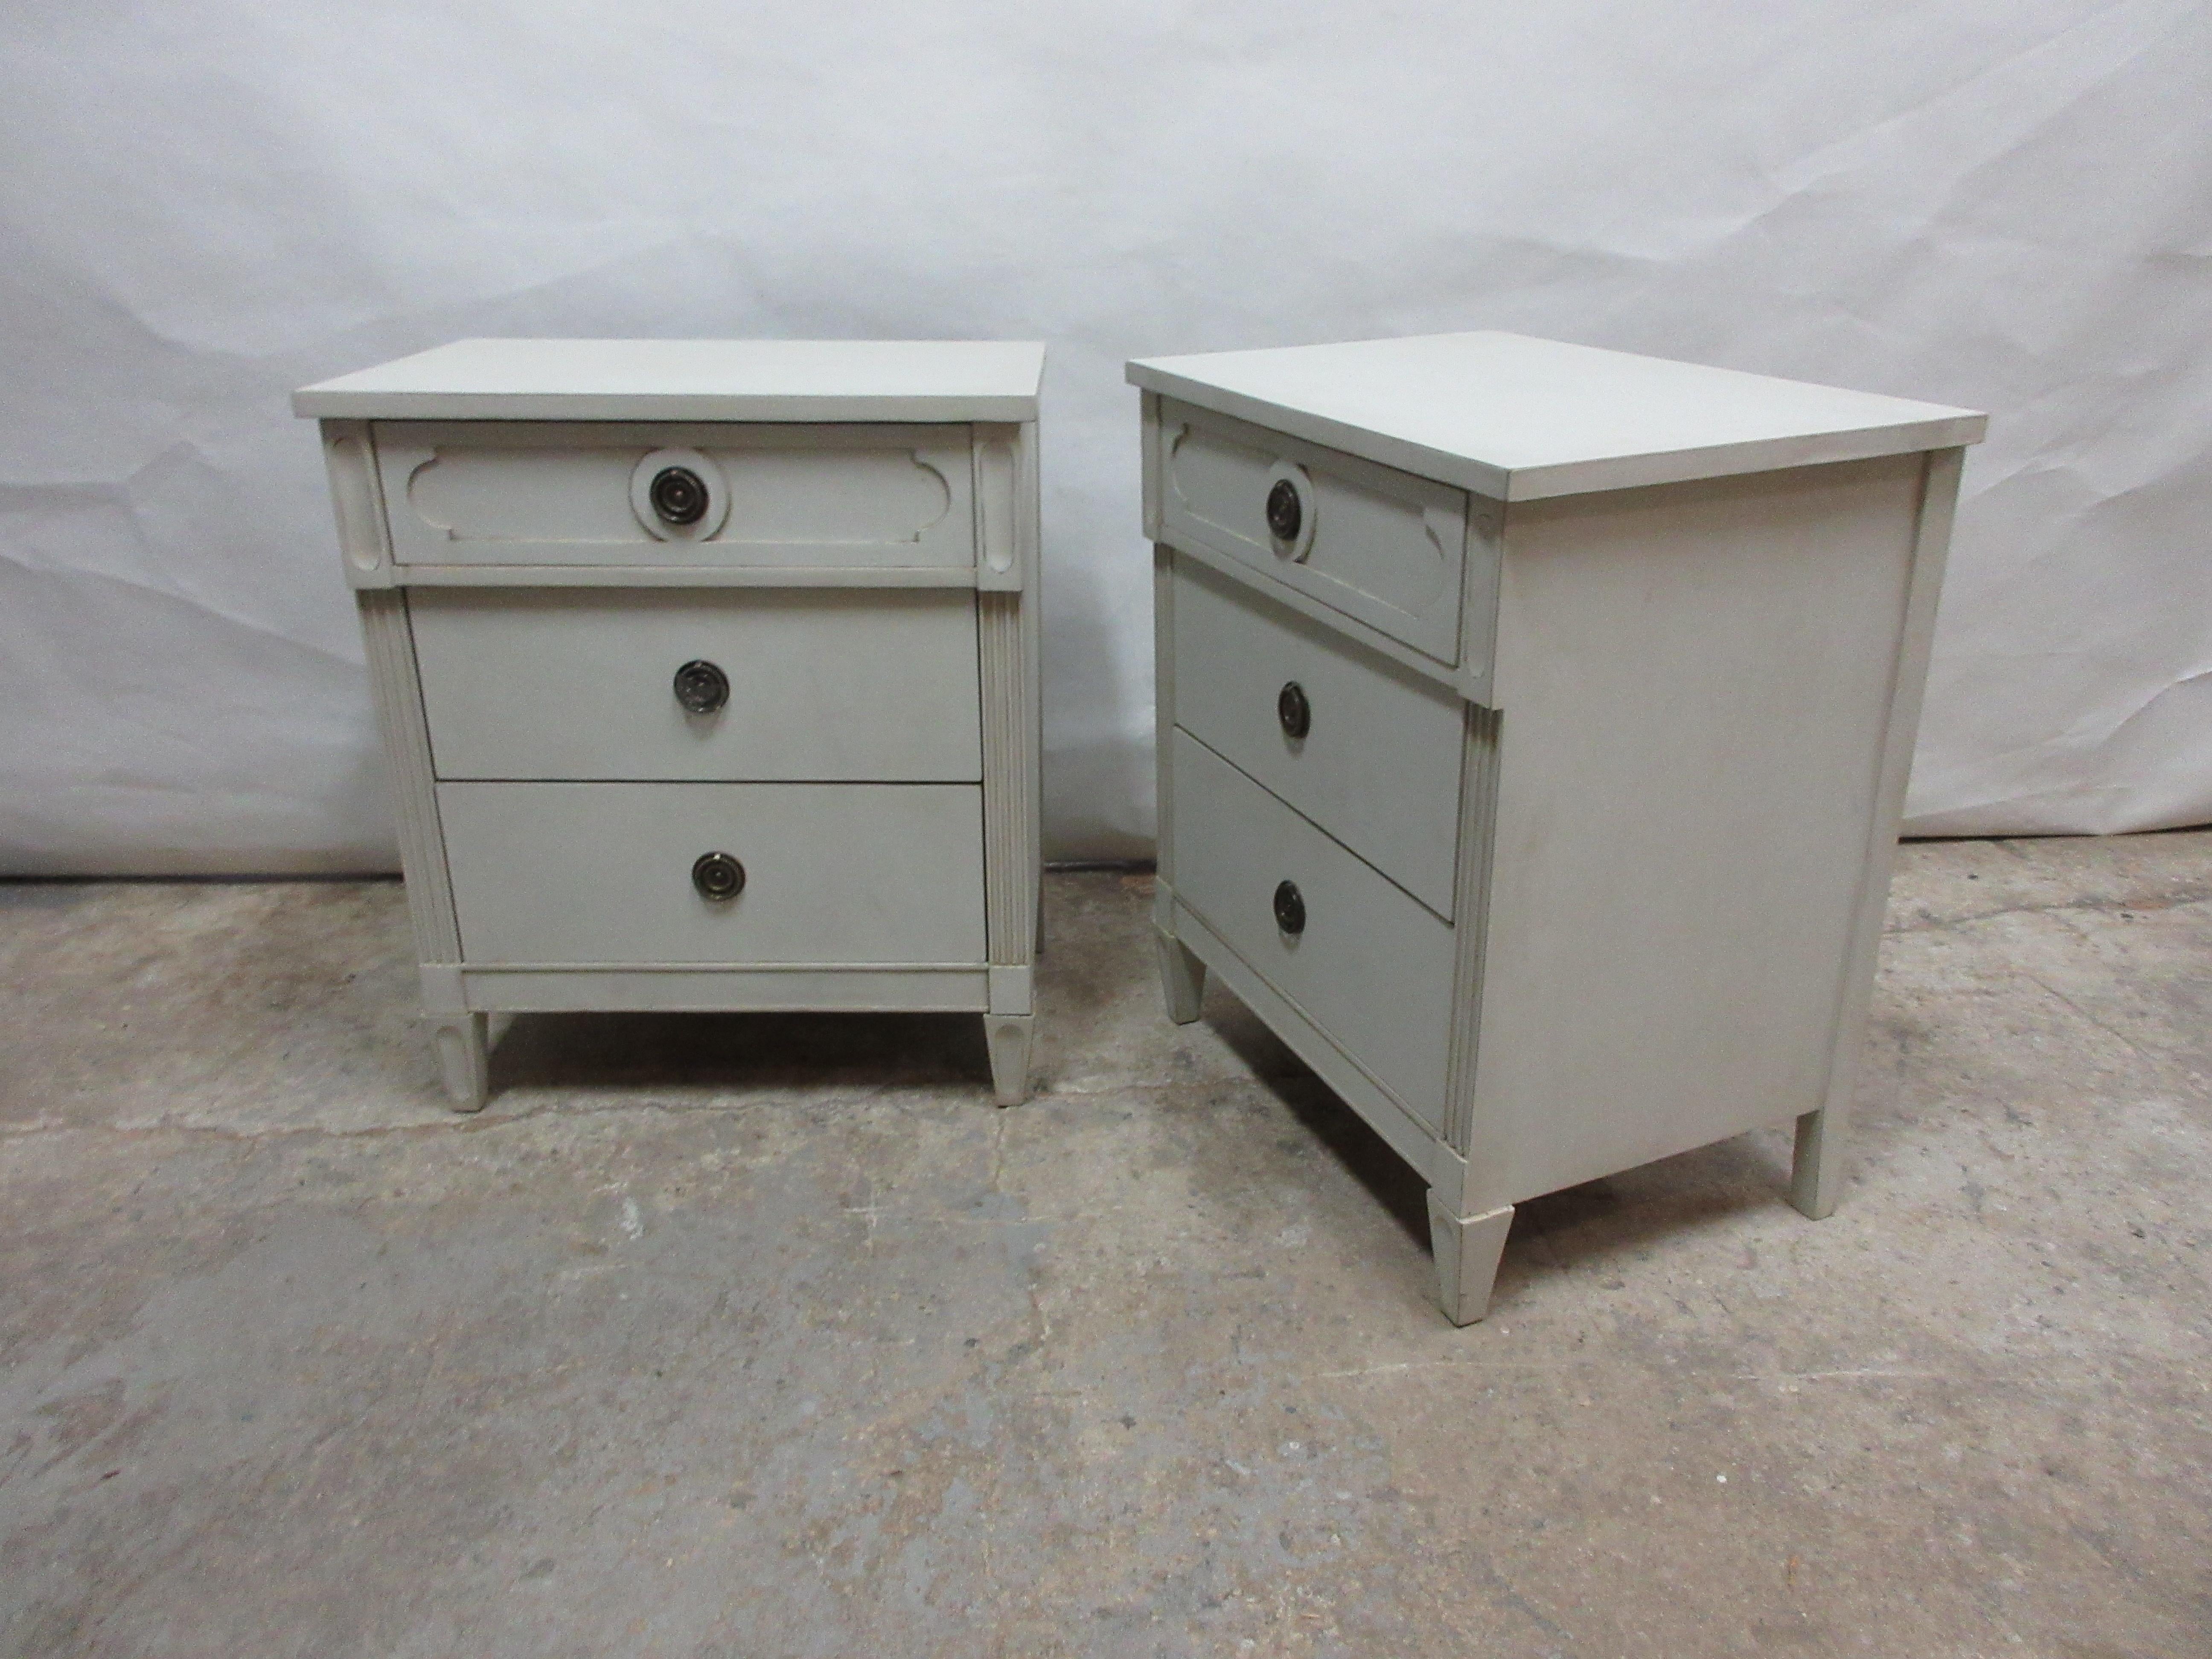 This is a set of 2-3 drawer Gustavian chests. They have been restored and repainted with Milk Paints 